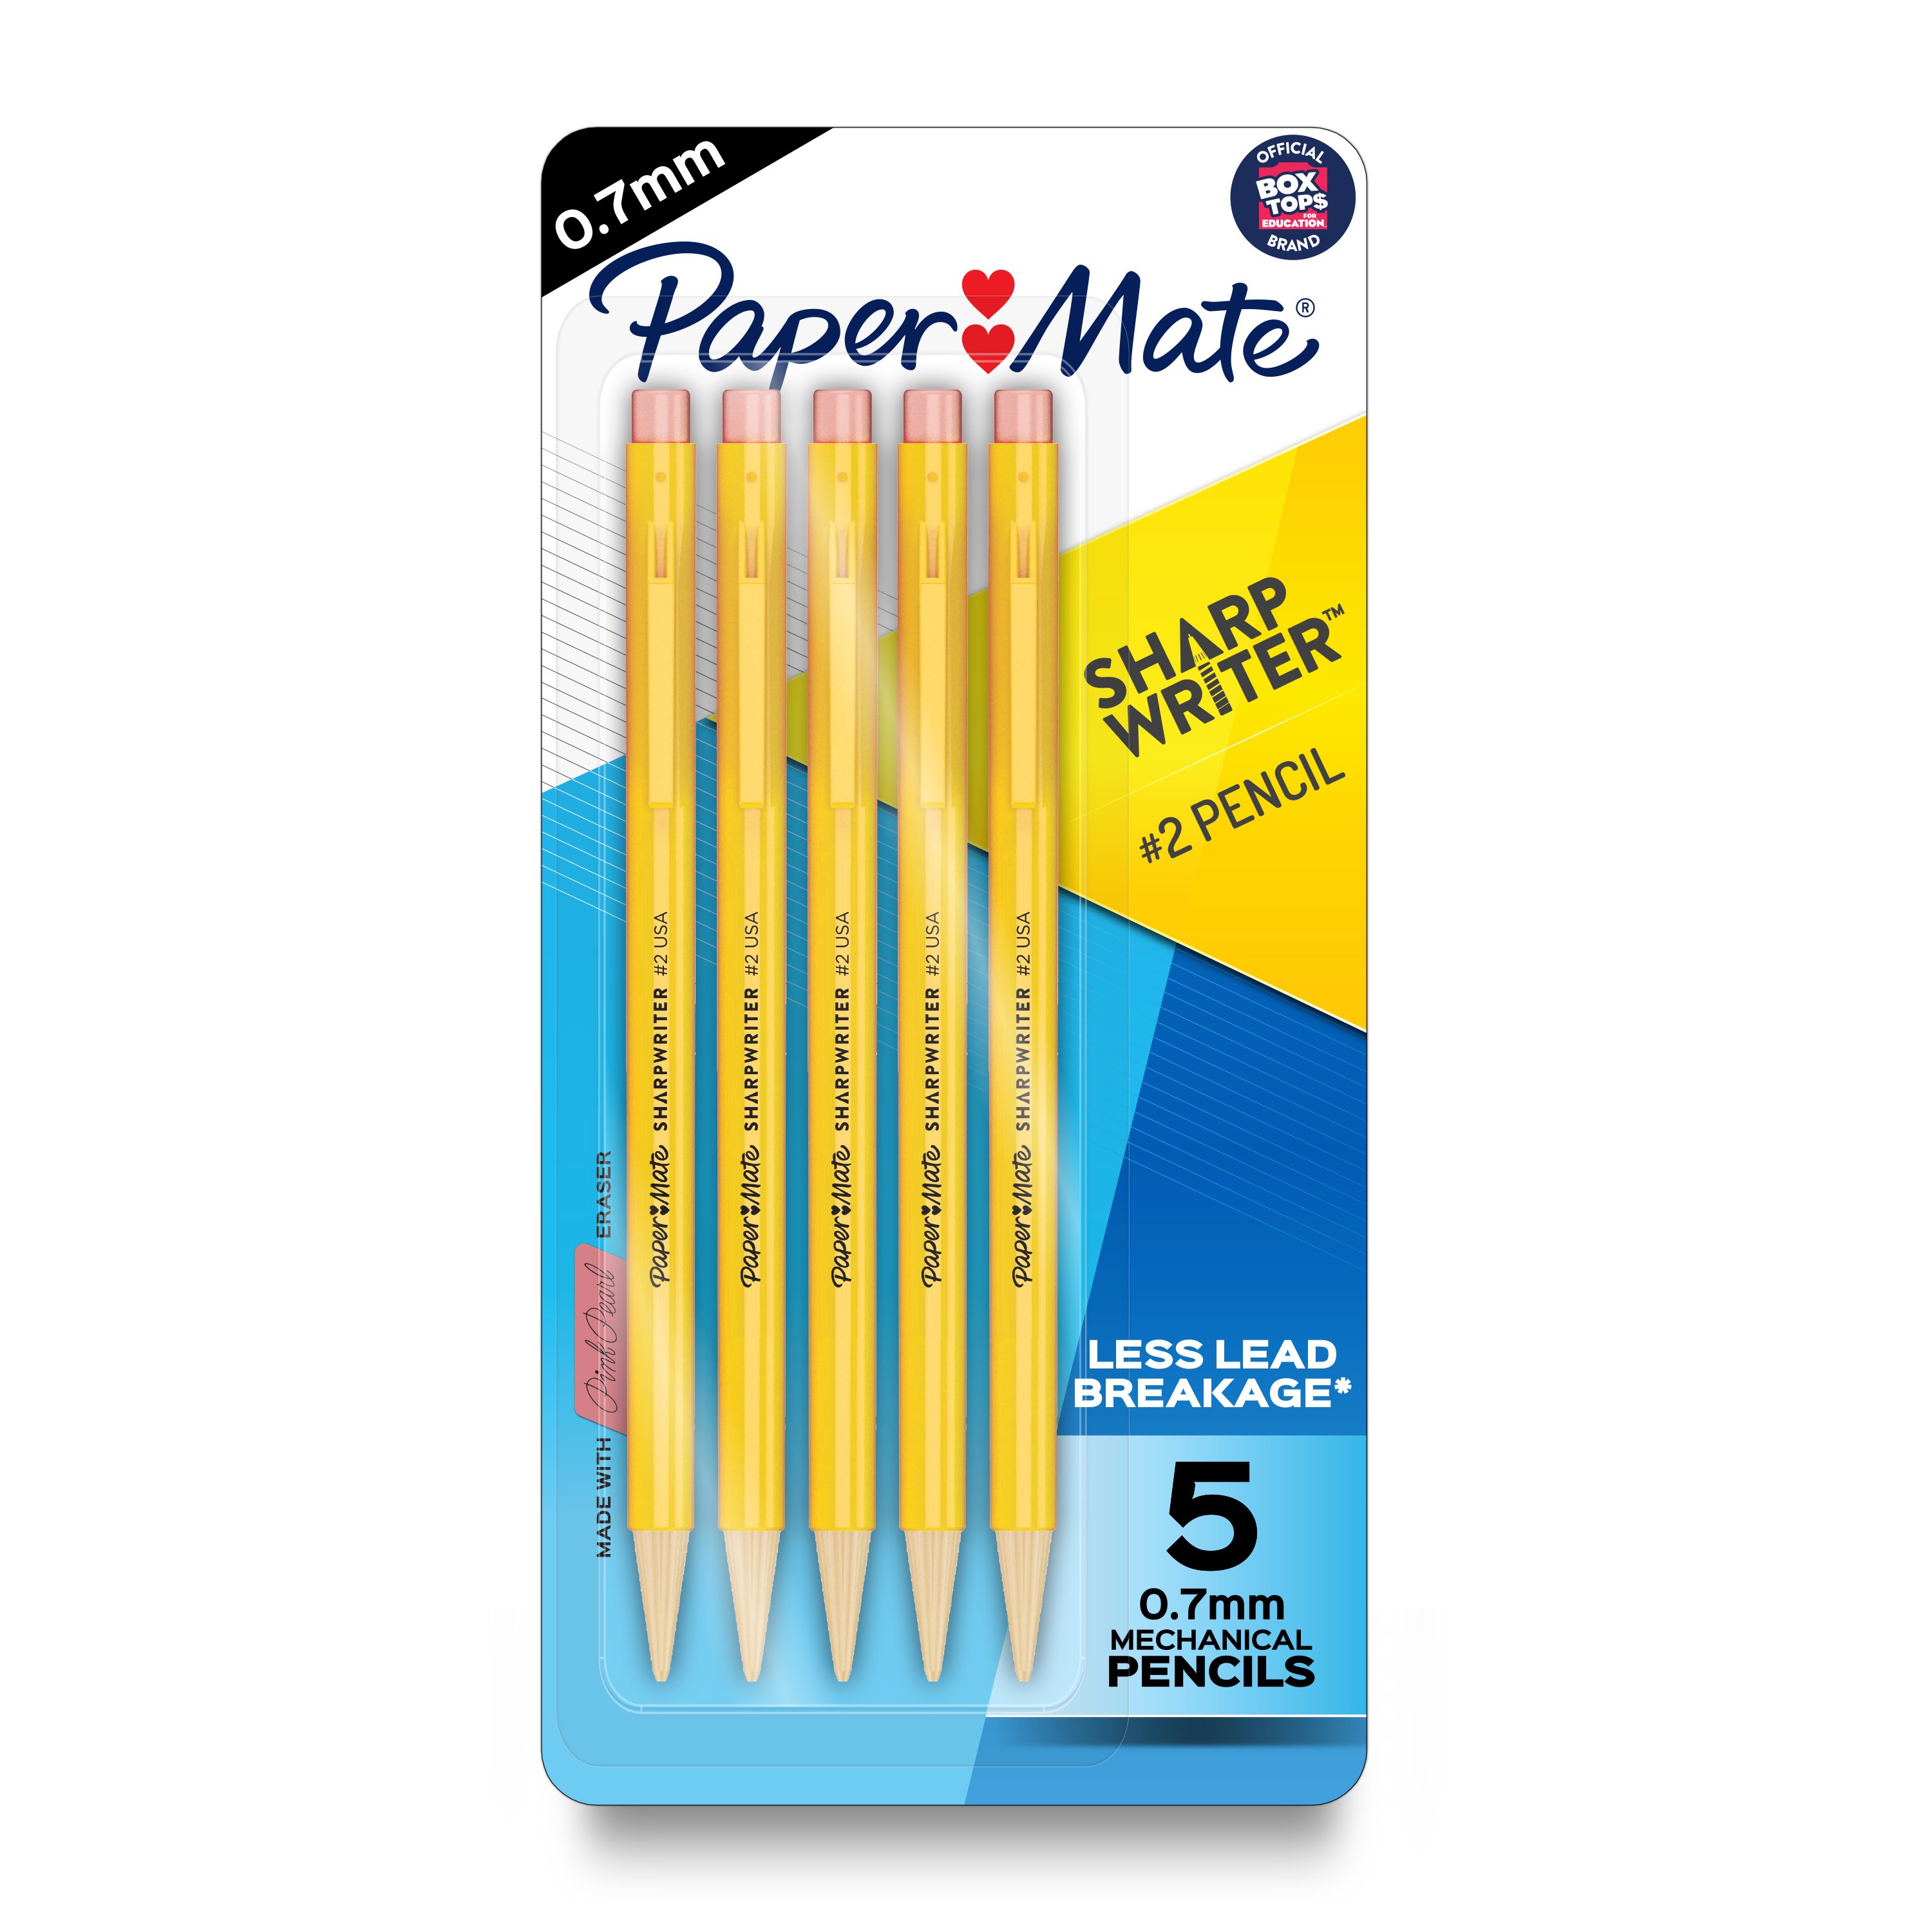 What Makes #2 Pencils So Special?